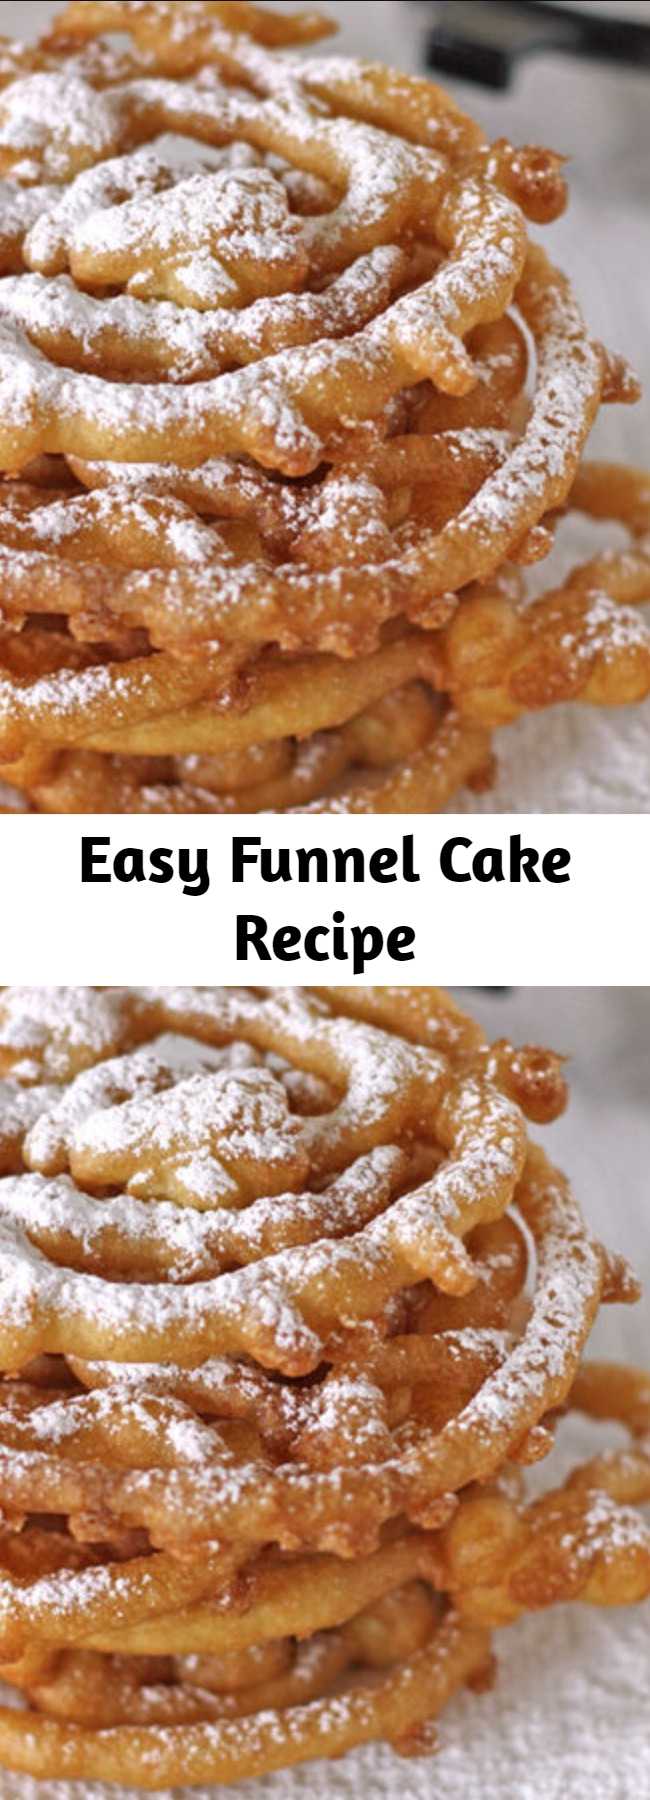 Easy Funnel Cake Recipe - Enjoy the deep-fried funnel cake awesomeness of the state fair all year round with this DIY recipe.